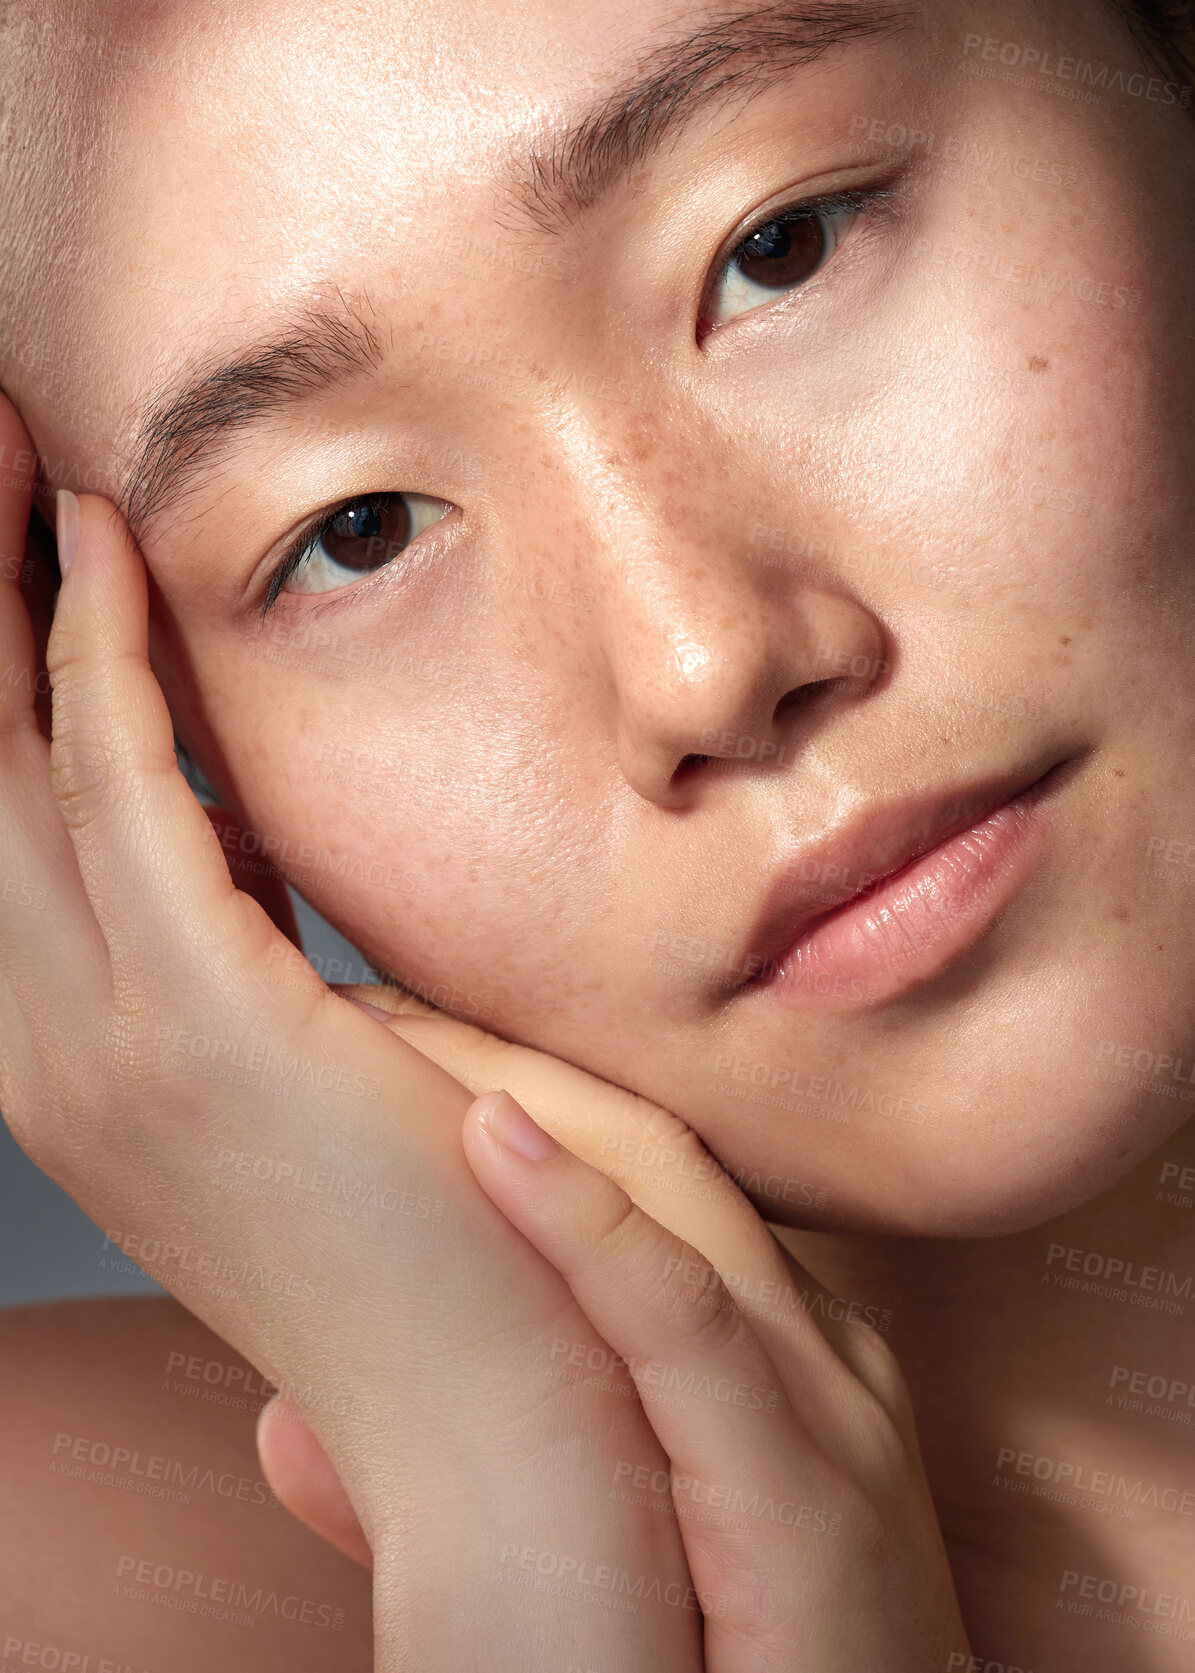 Buy stock photo Closeup shot of a beautiful young woman with freckles on her face